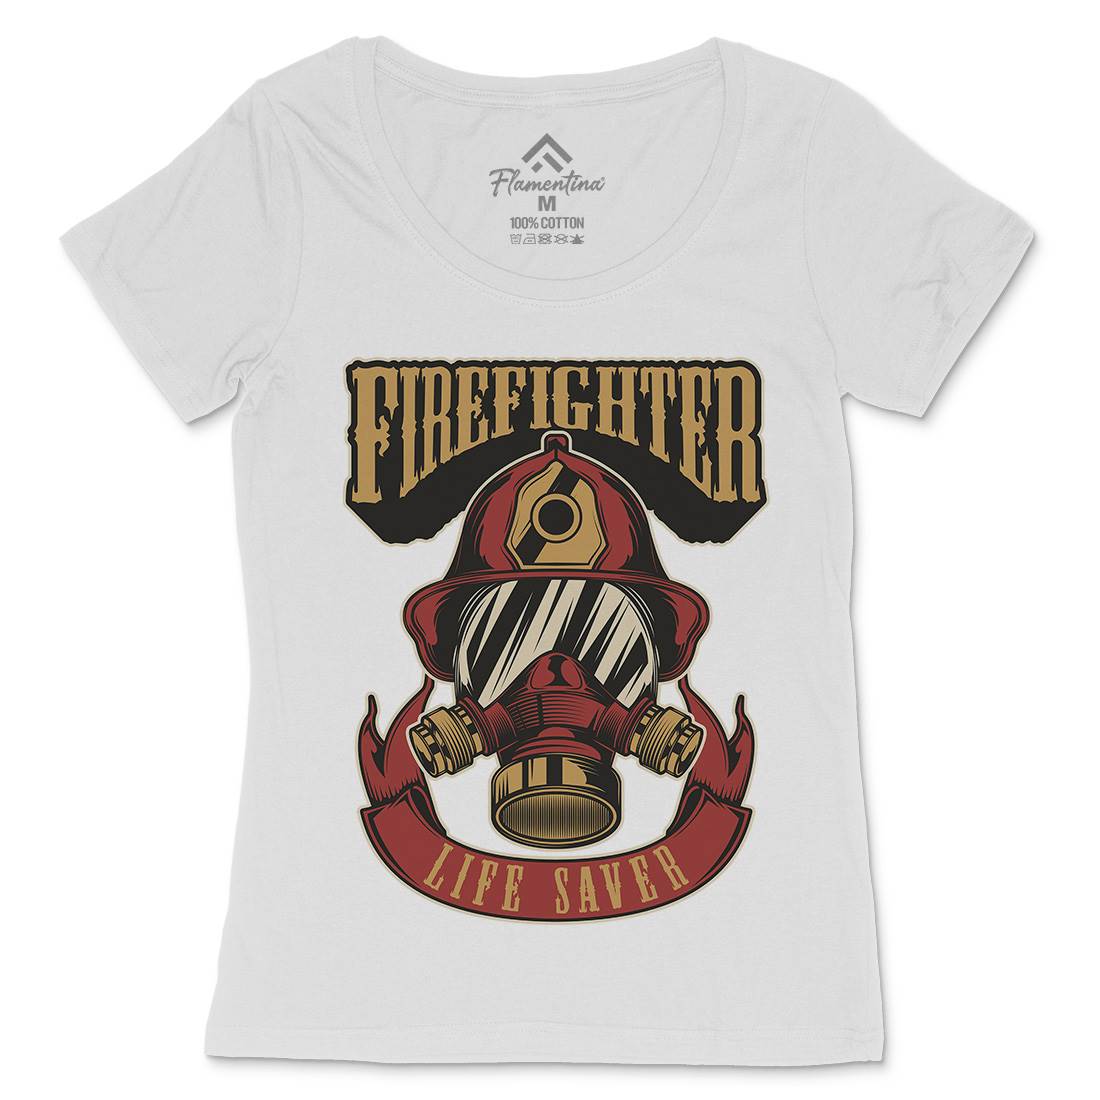 Life Saver Womens Scoop Neck T-Shirt Firefighters C827